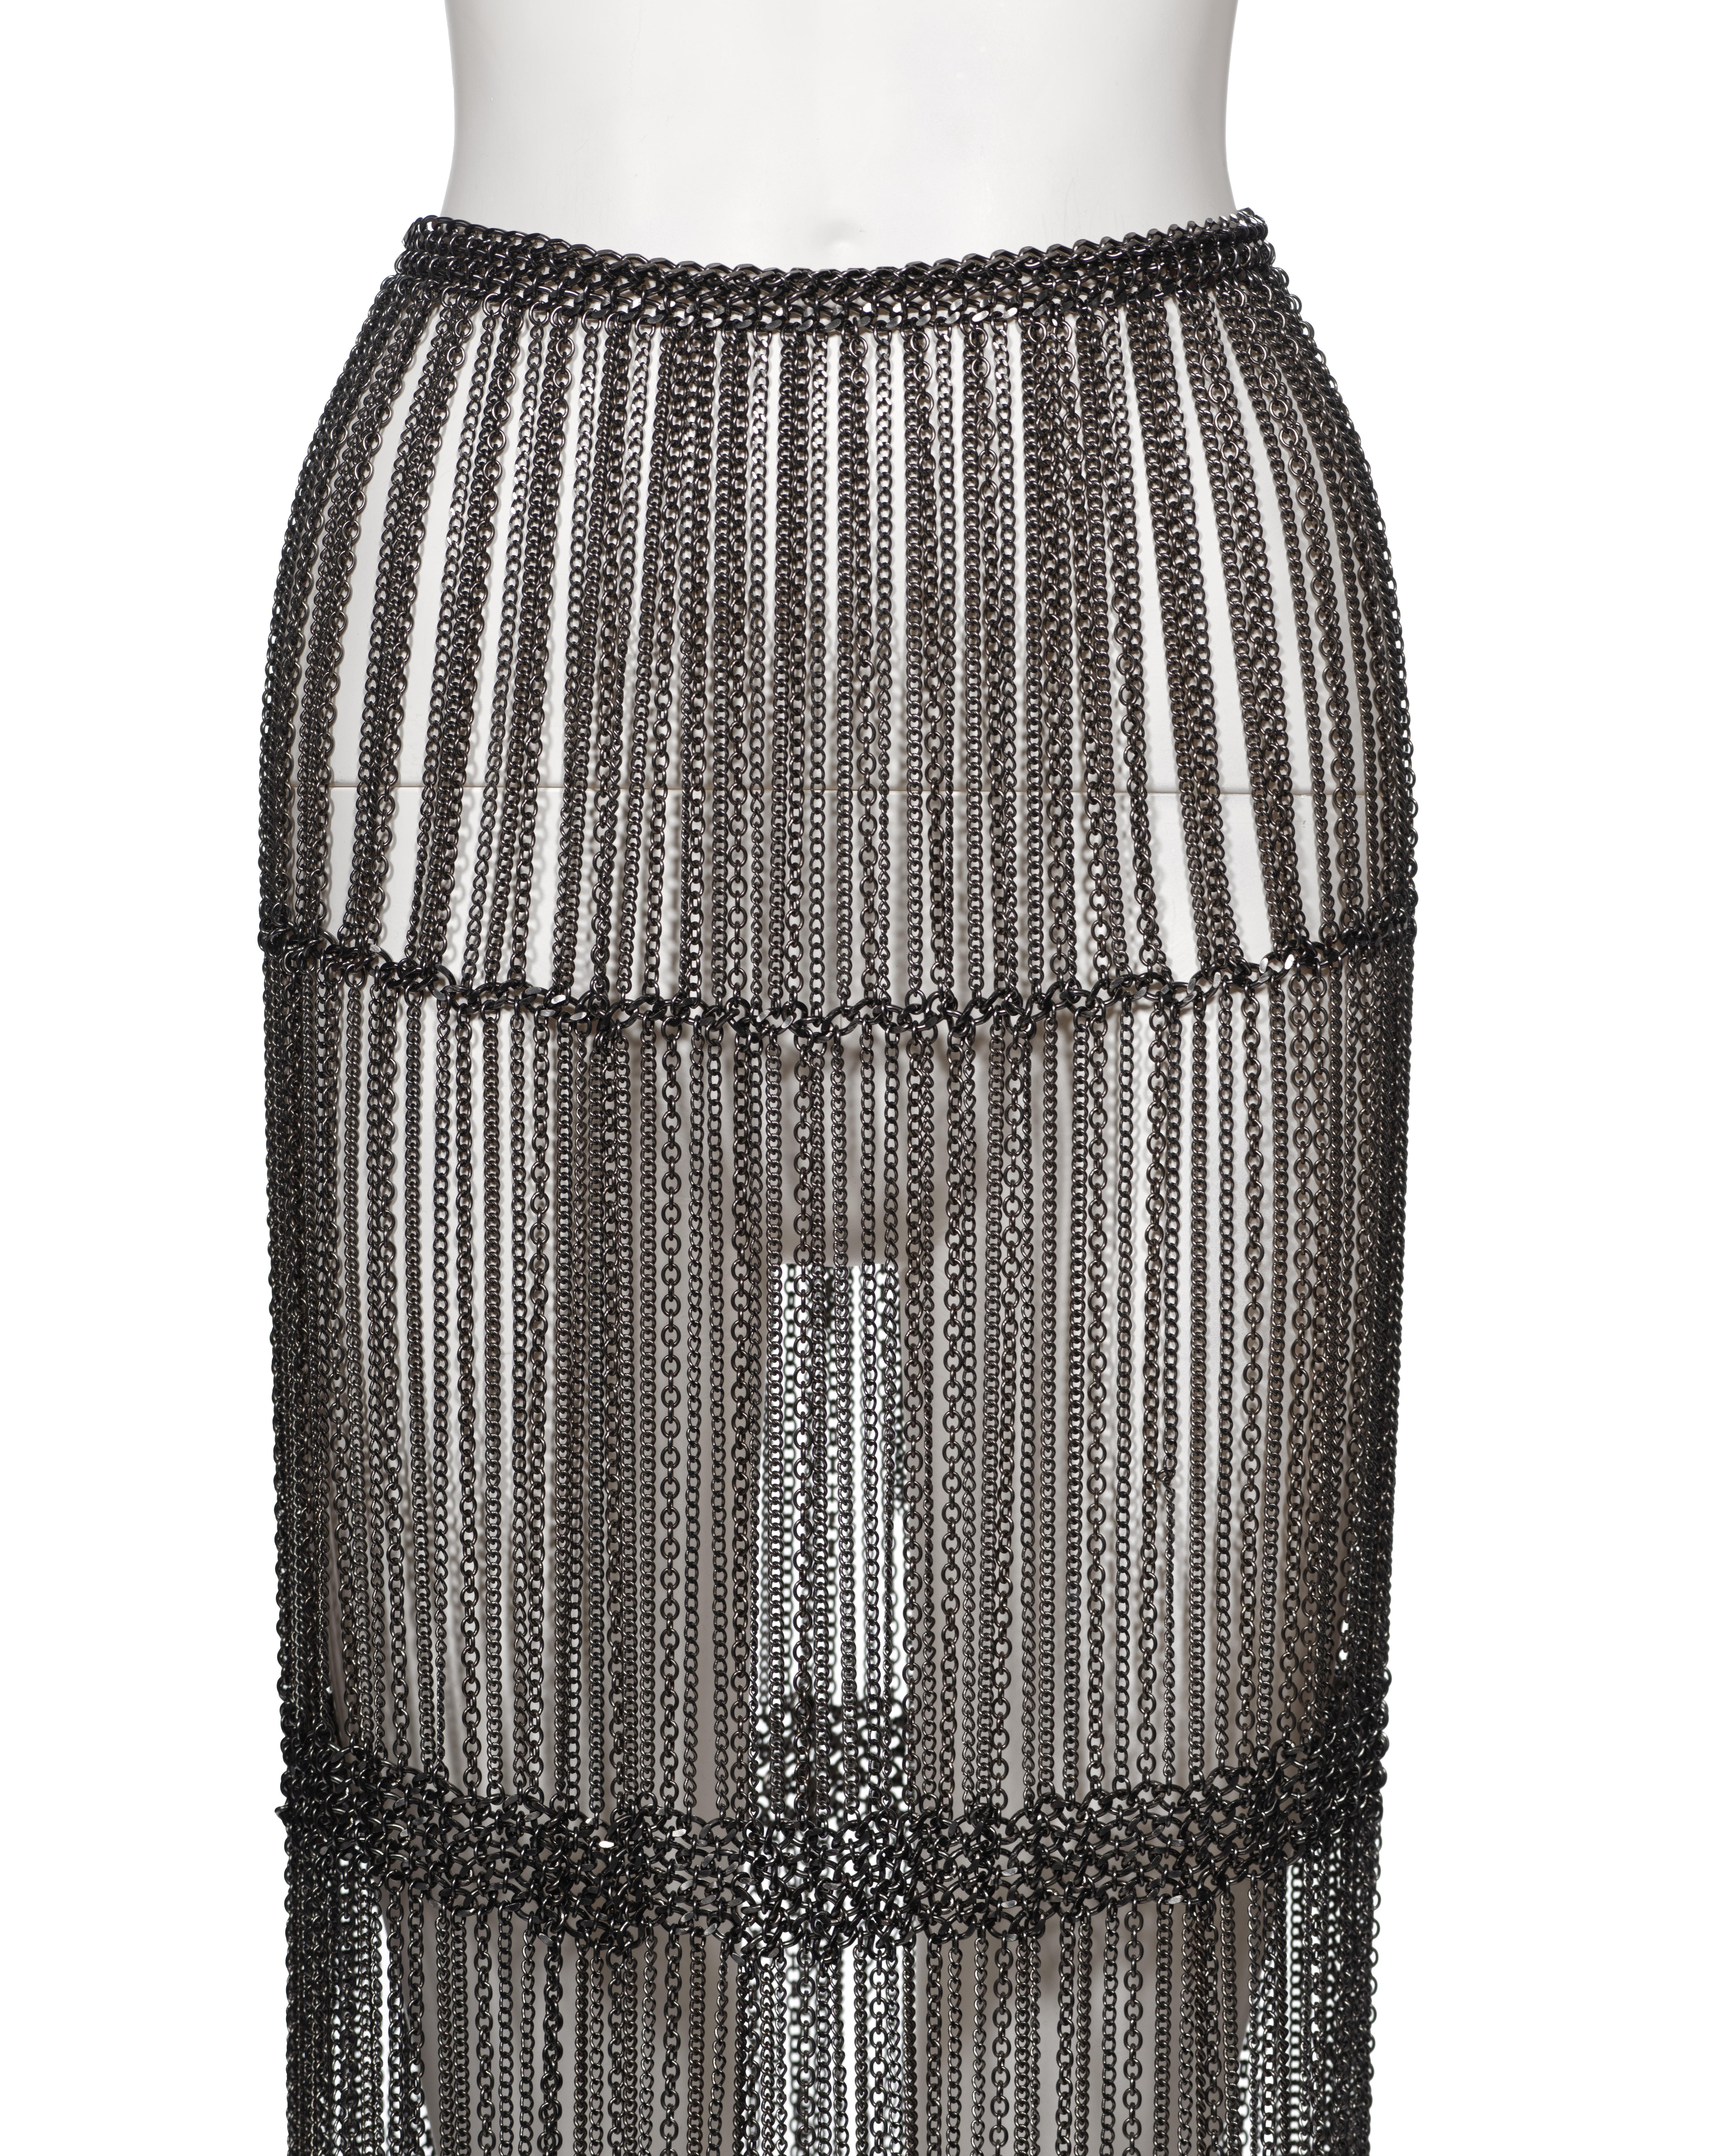 Prada by Miuccia Prada Silver Metal Chain Fringed Evening Skirt, fw 2002 In Excellent Condition For Sale In London, GB